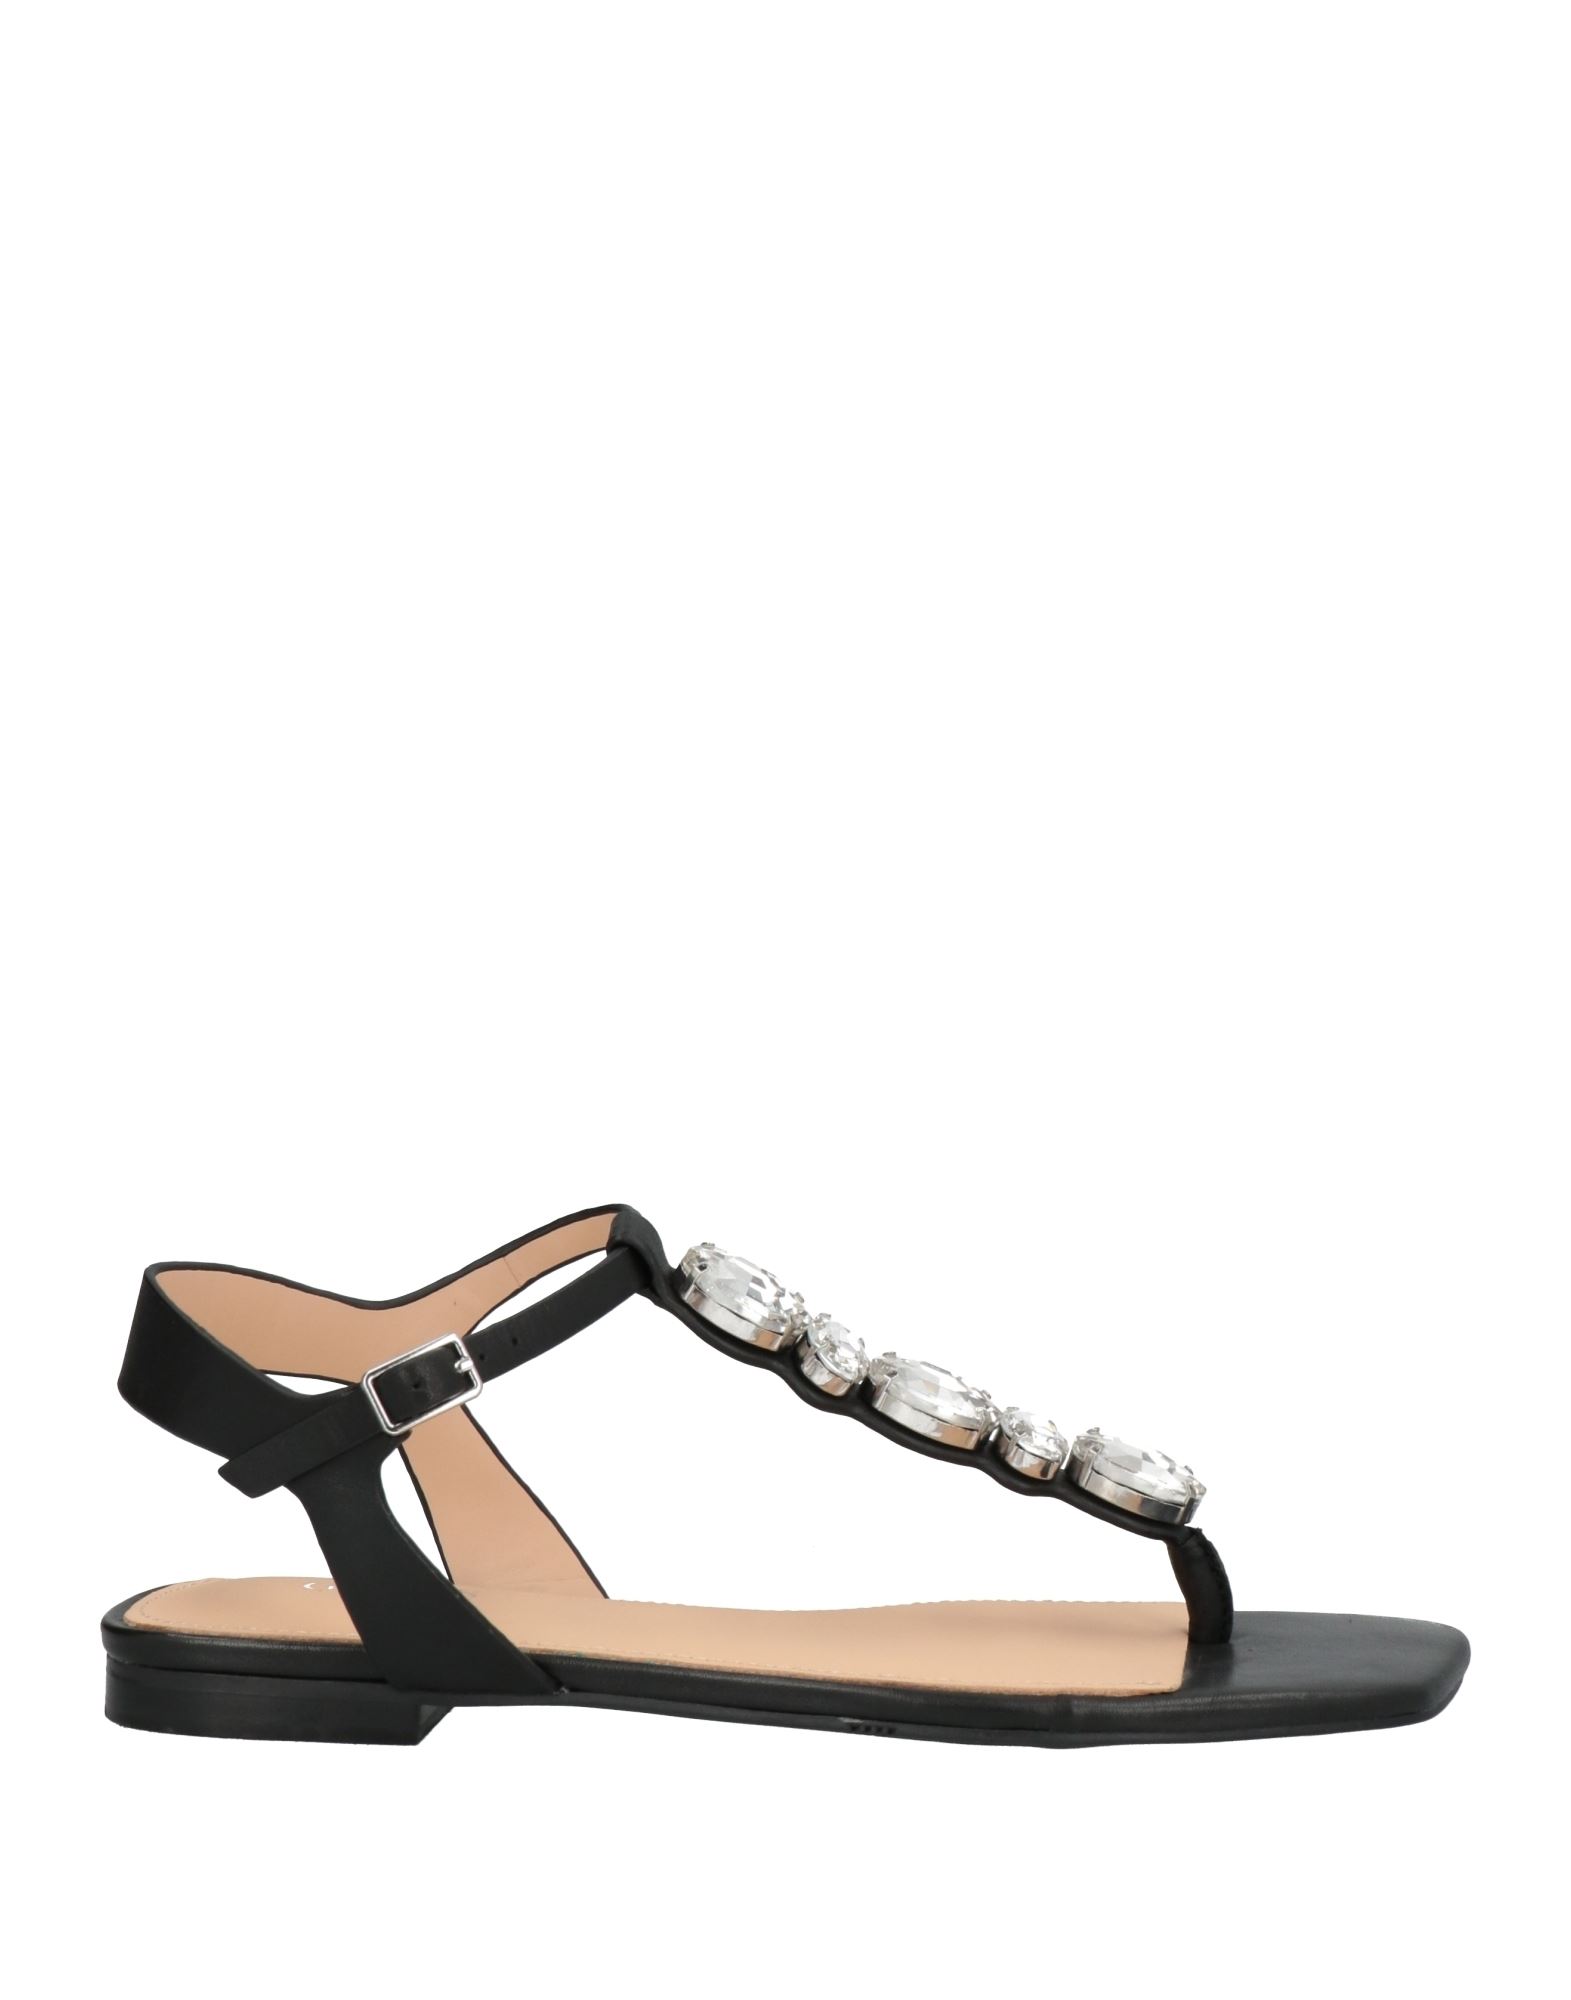 Guess Toe Strap Sandals In Black